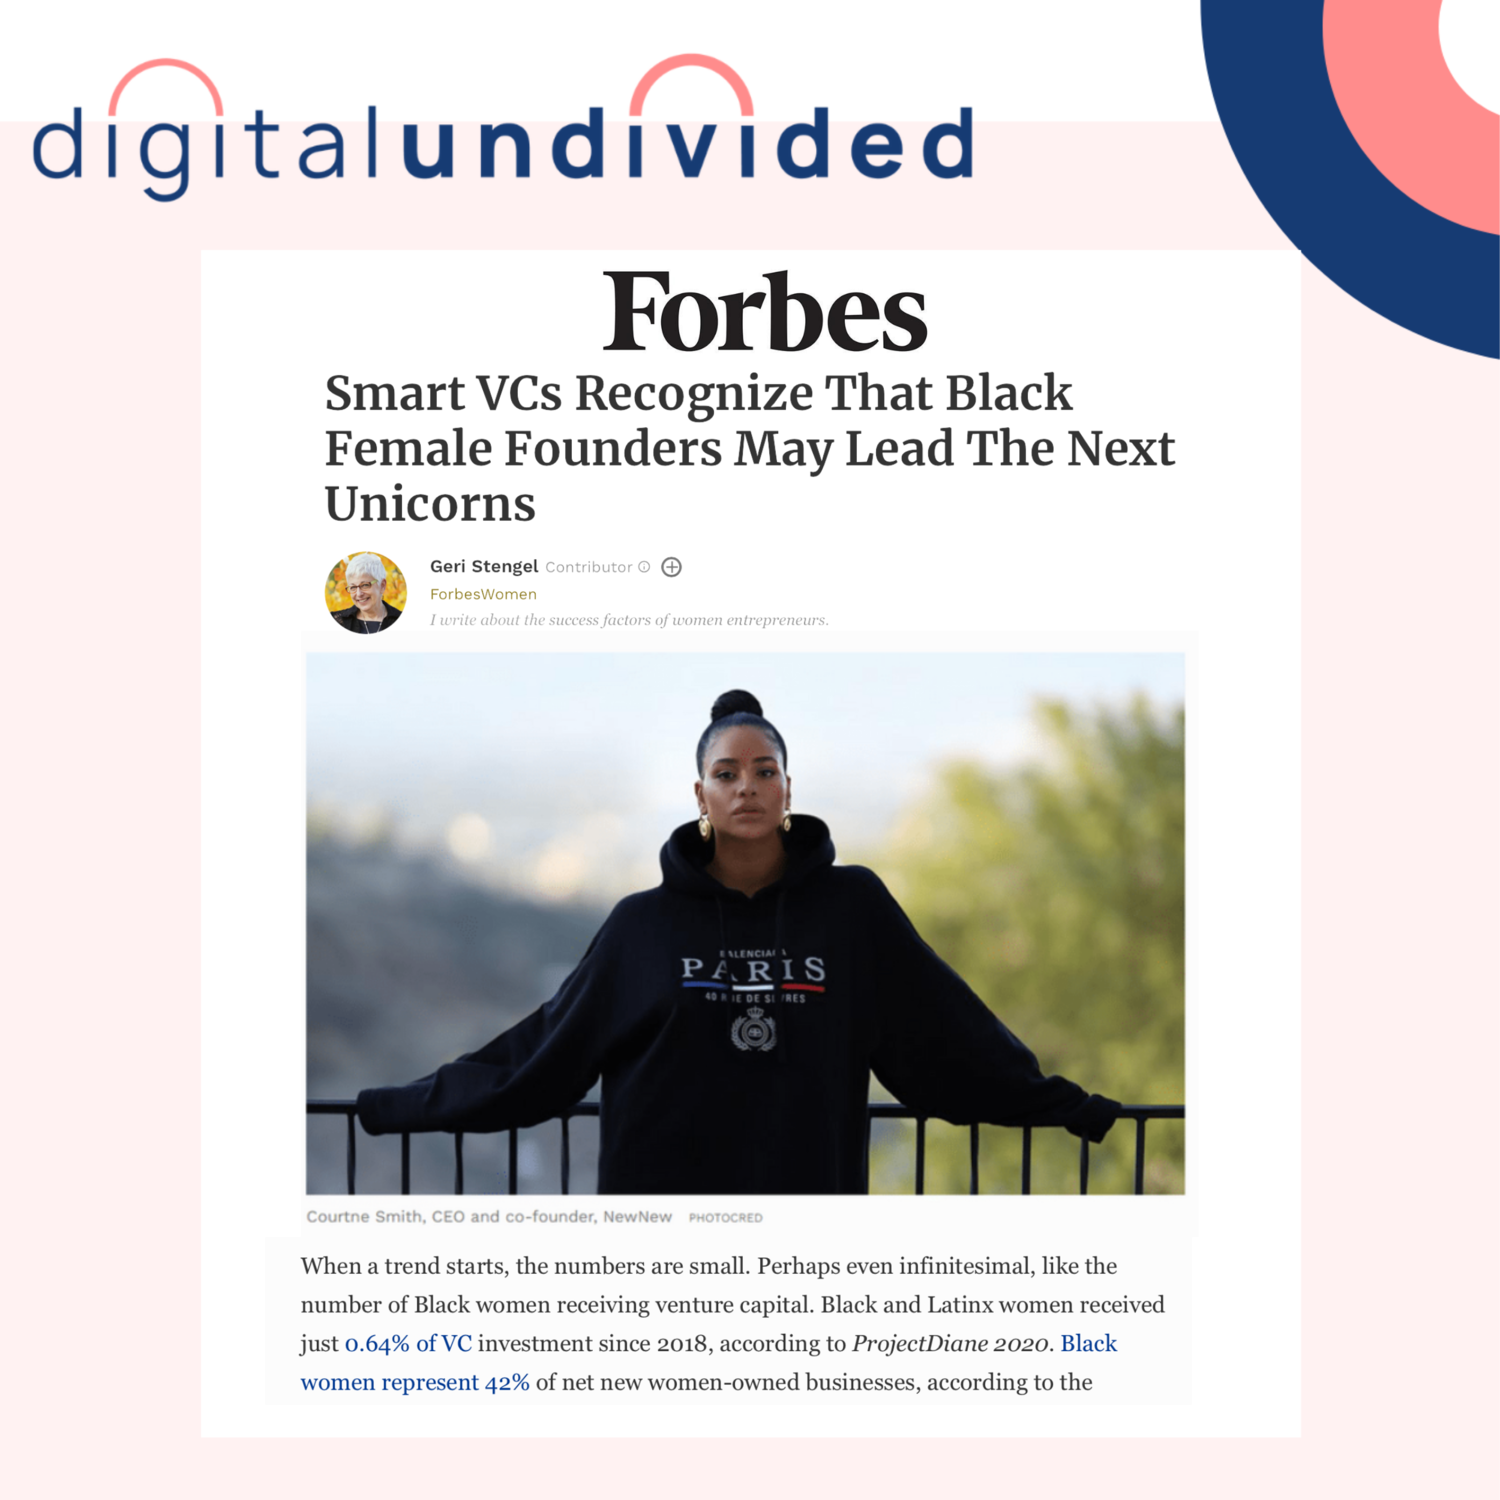 Smart VCs Recognize That Black Female Founders May Lead The Next Unicorns